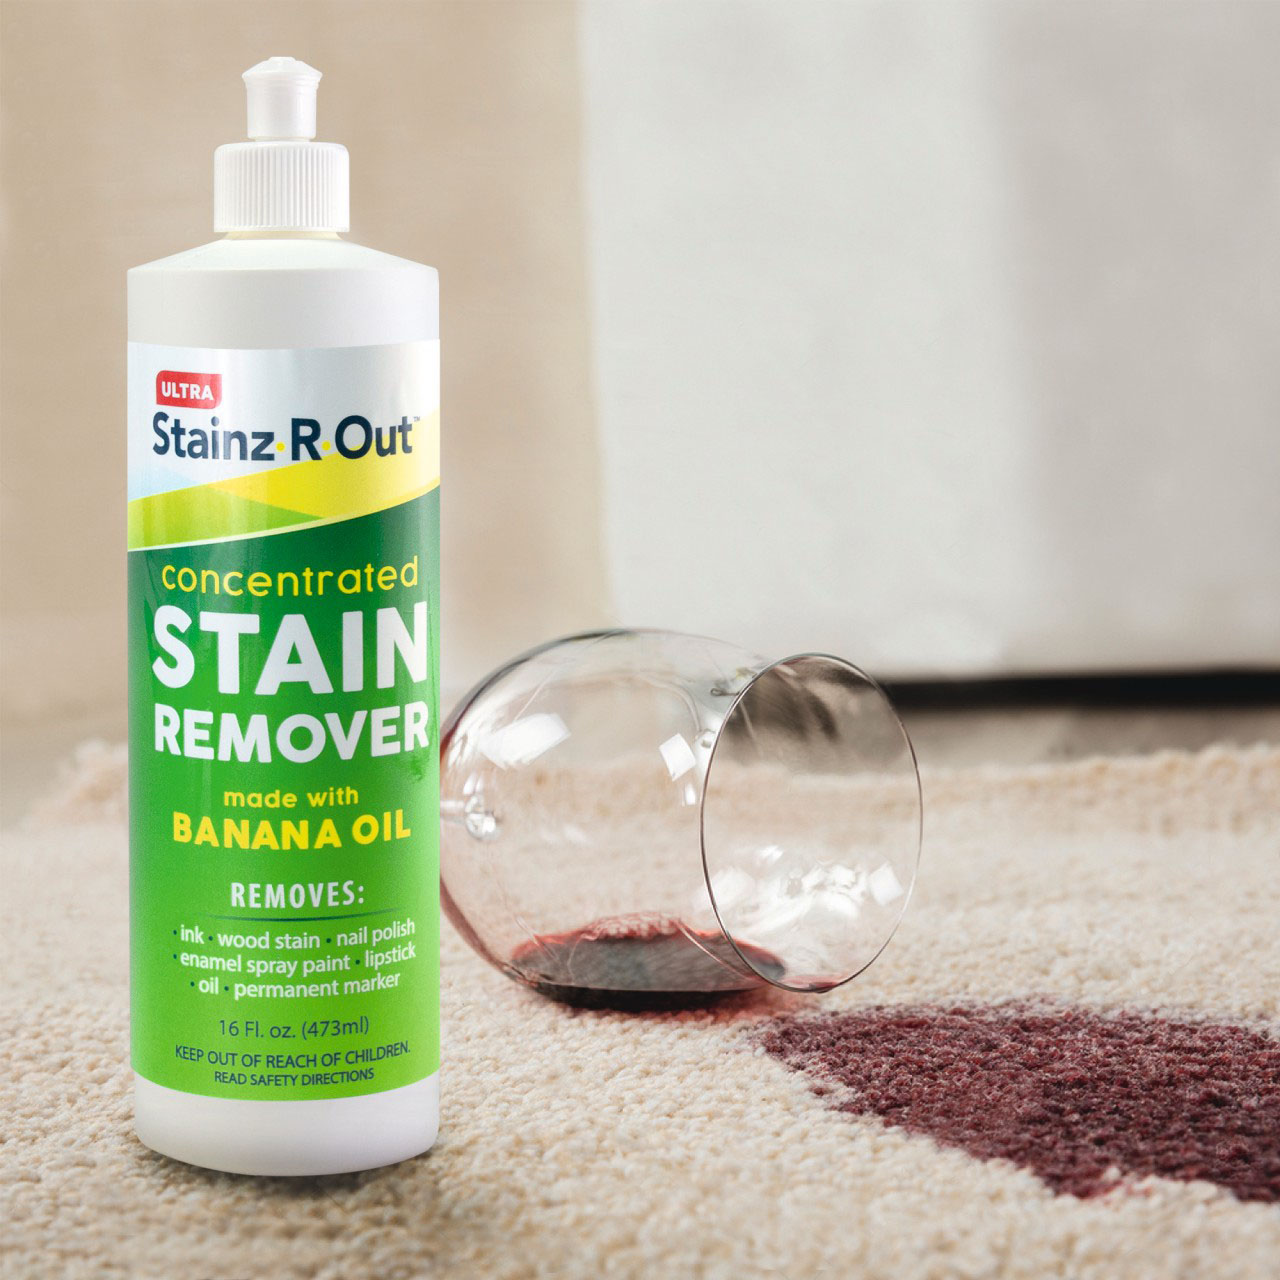 Stainz-R-Out Cleaner